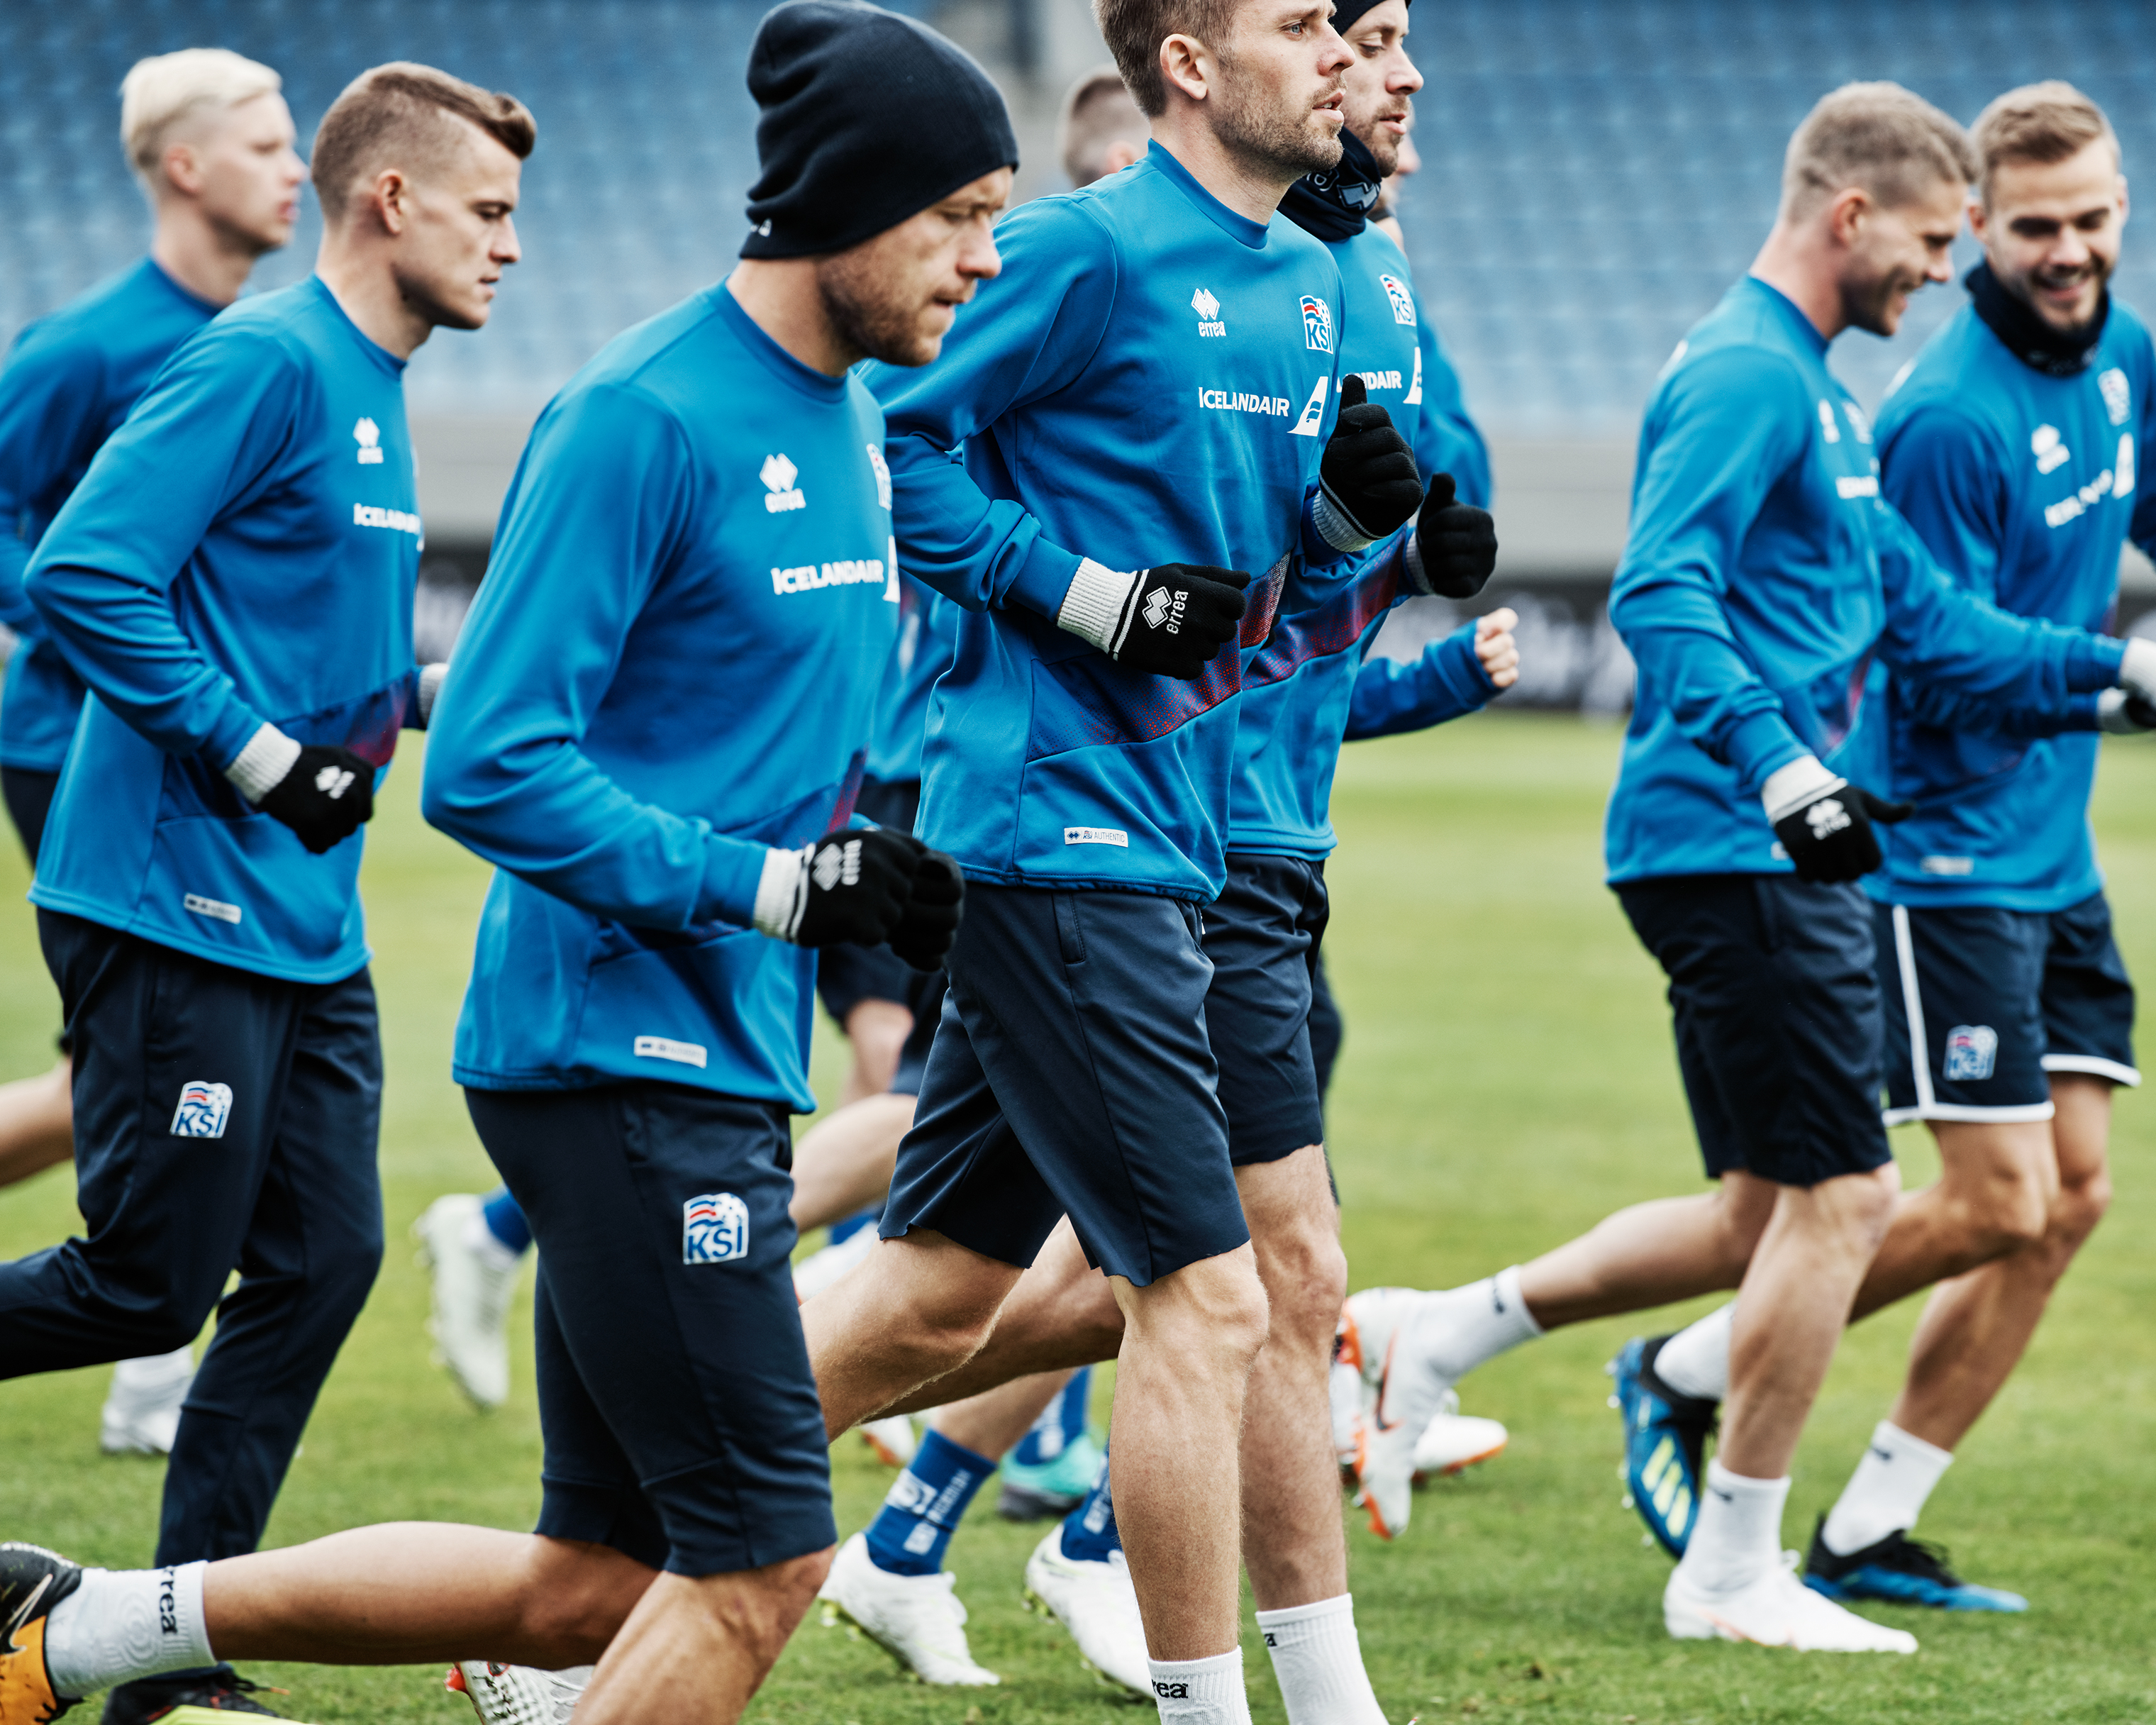 Players from Iceland, the smallest country to qualify for a World Cup, warm up before a June 2 match against Norway. (Thomas Prior for TIME)